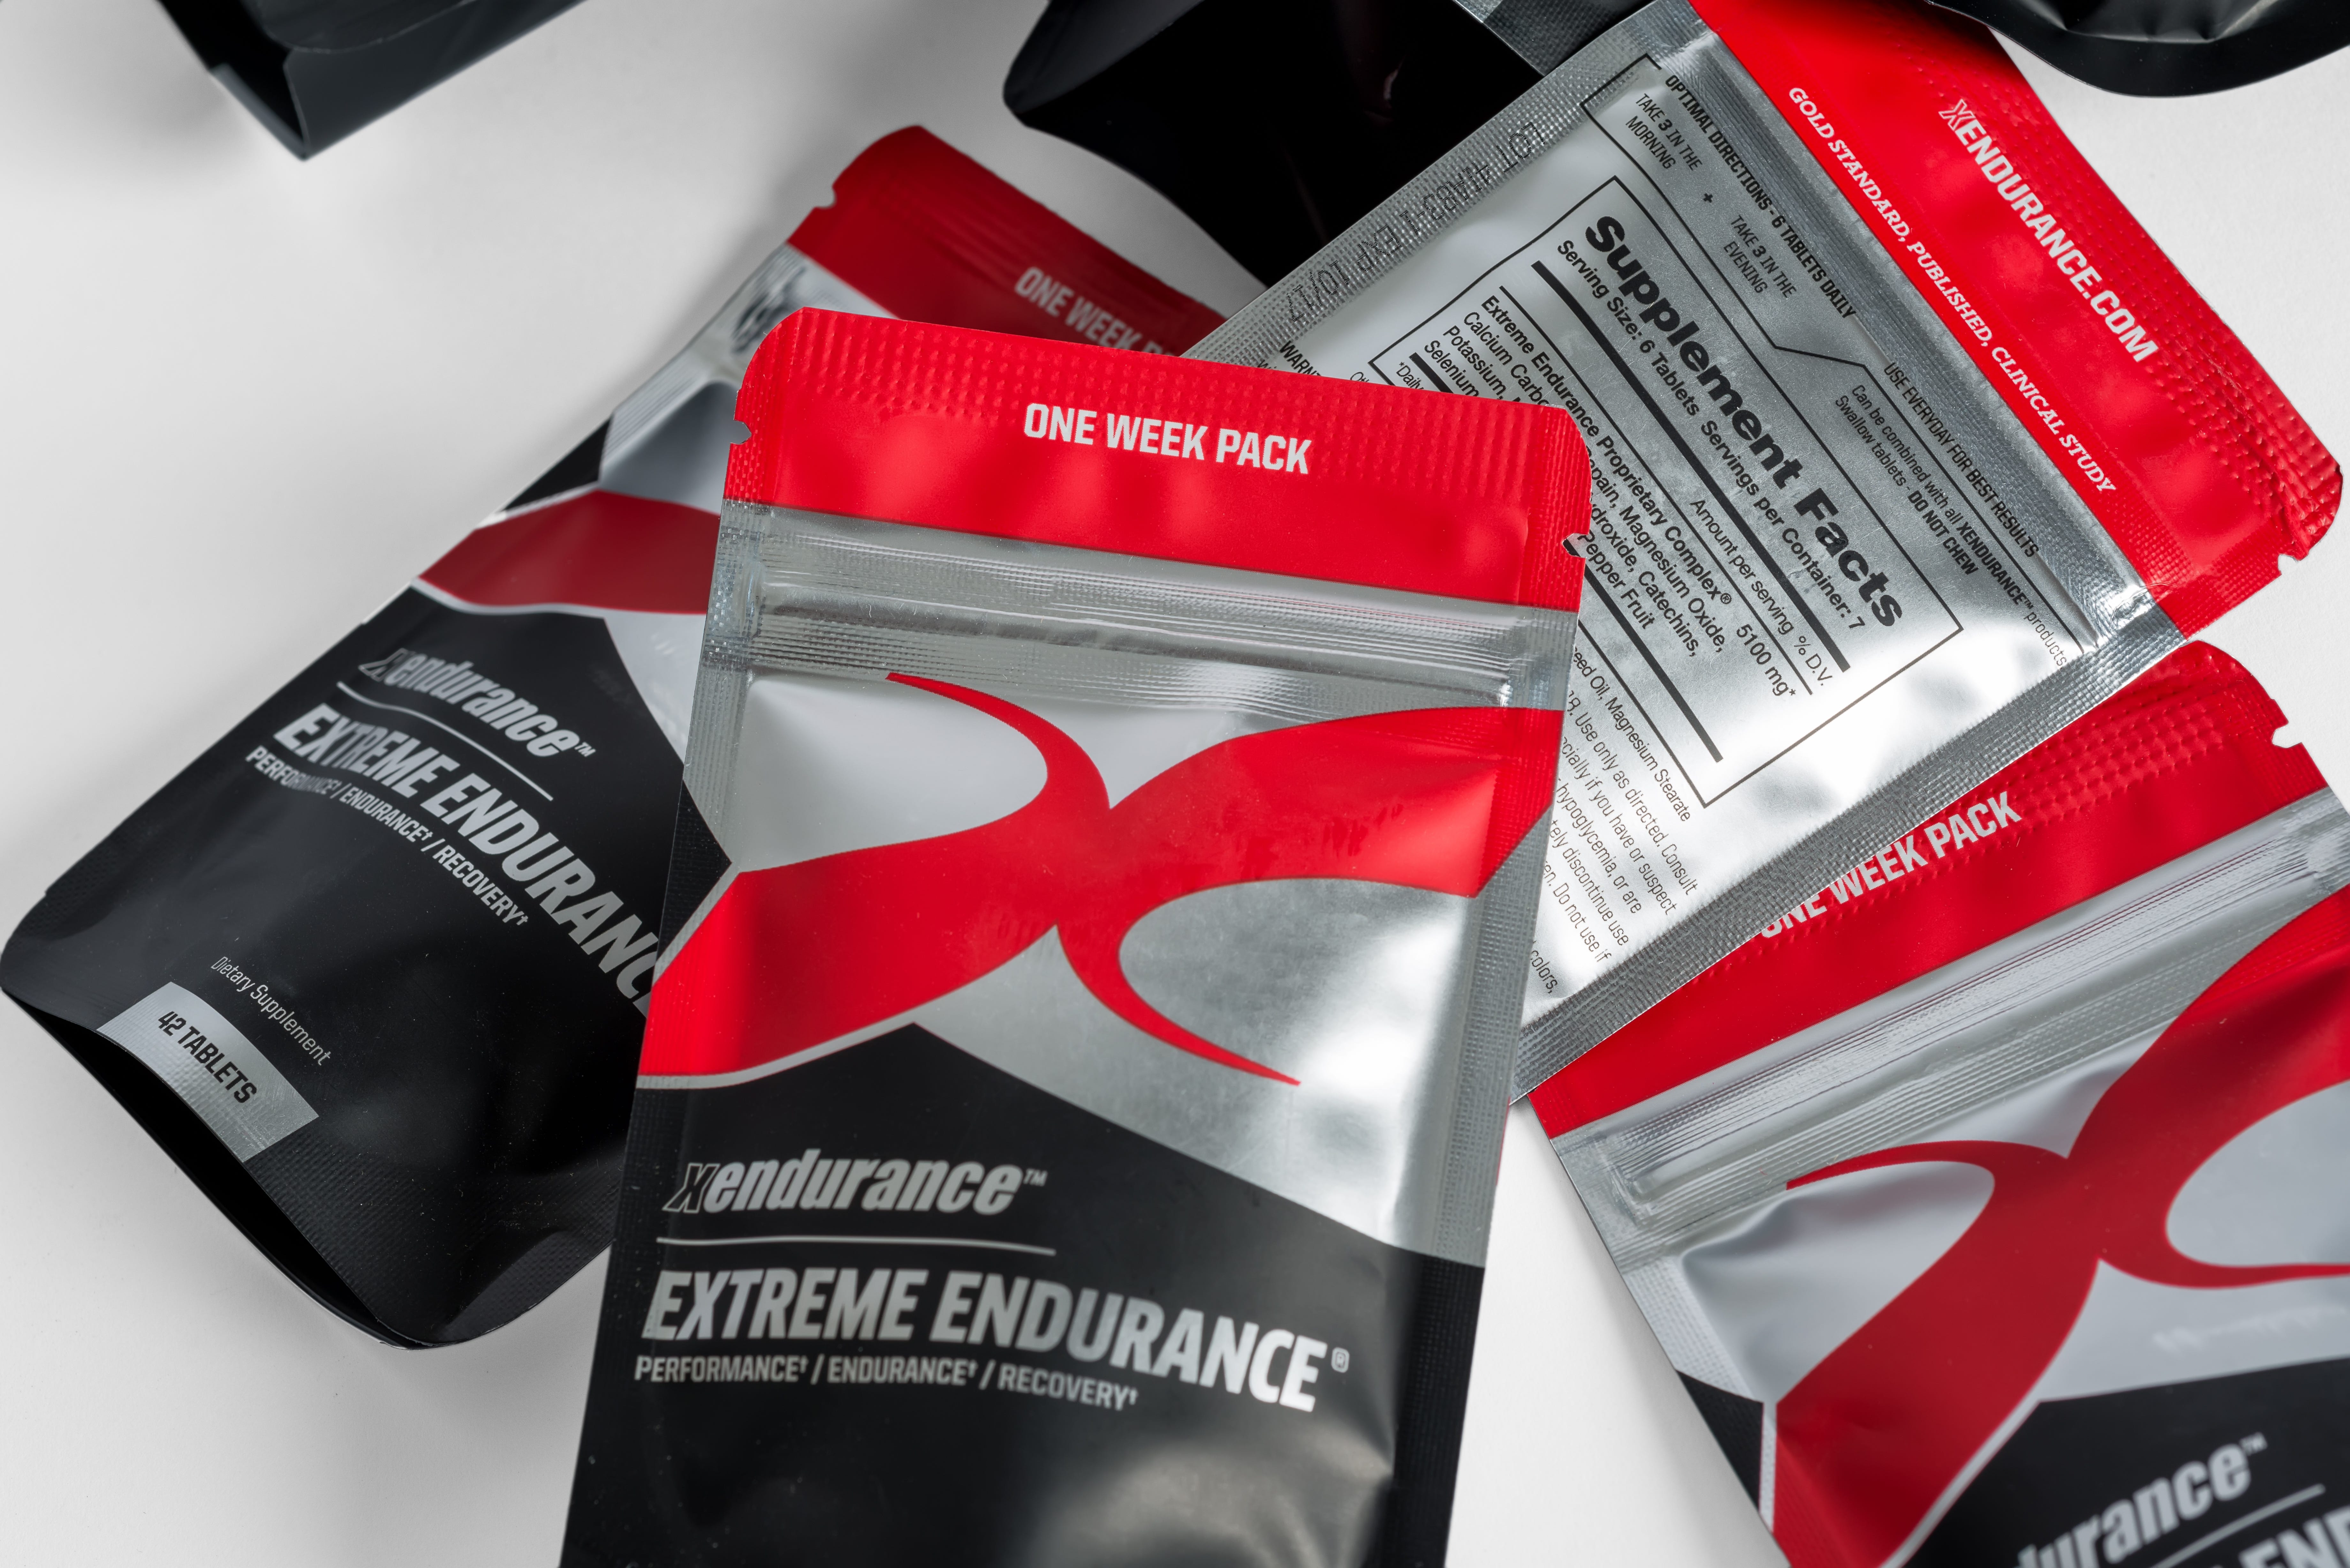 X-Endurance Extreme Endurance is a Supplement To Experiment With | by Mark  Barroso | Medium